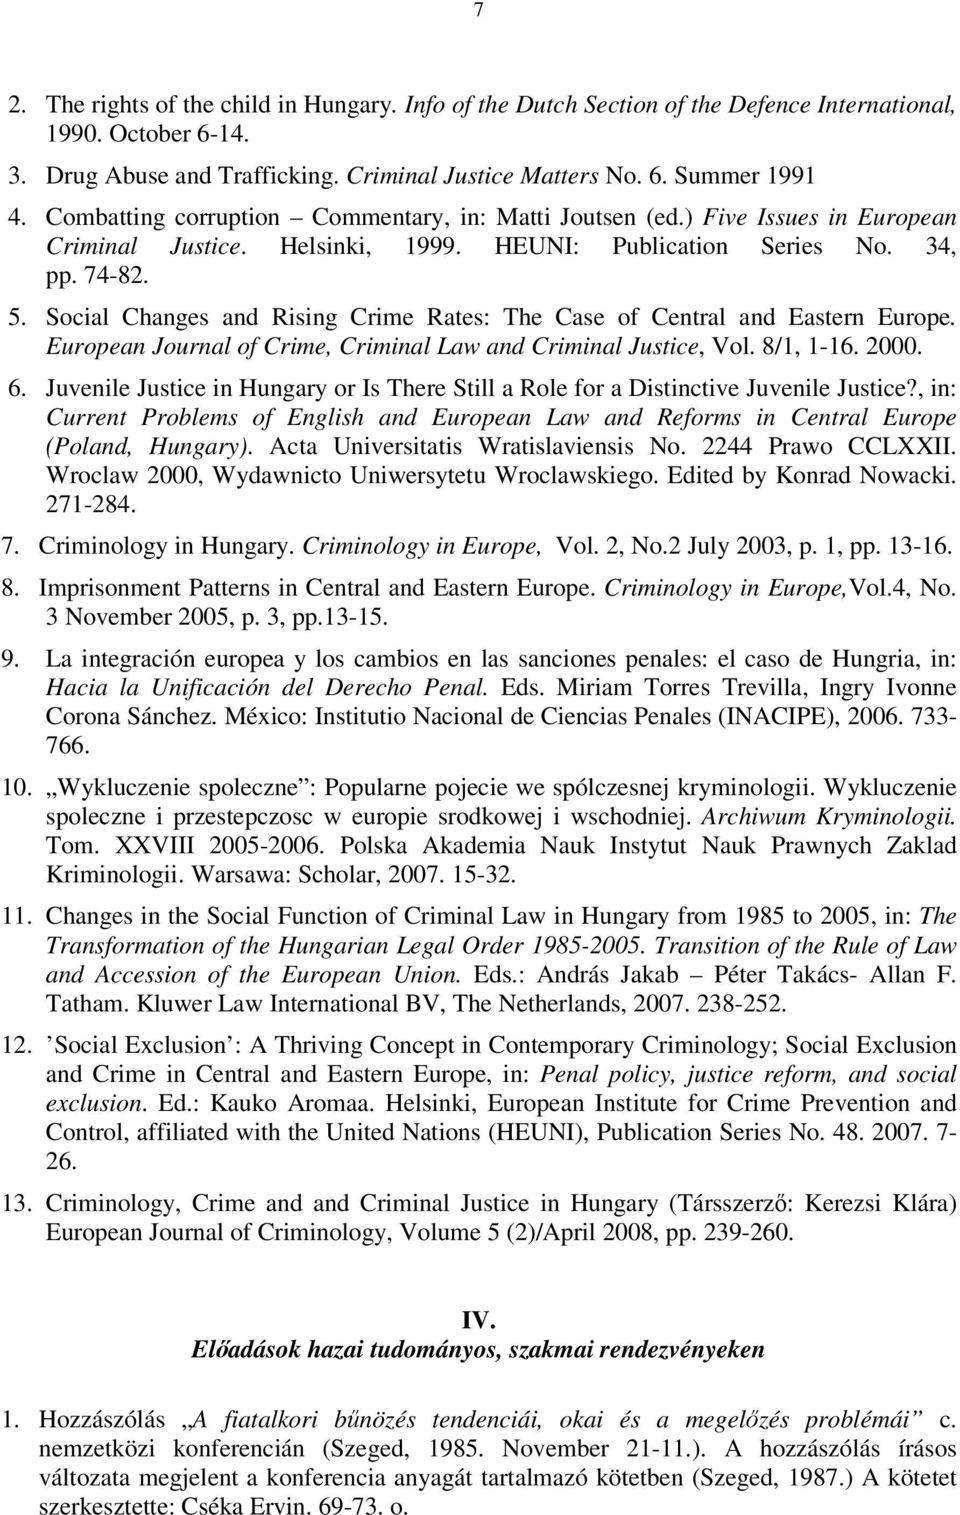 Social Changes and Rising Crime Rates: The Case of Central and Eastern Europe. European Journal of Crime, Criminal Law and Criminal Justice, Vol. 8/1, 1-16. 2000. 6.